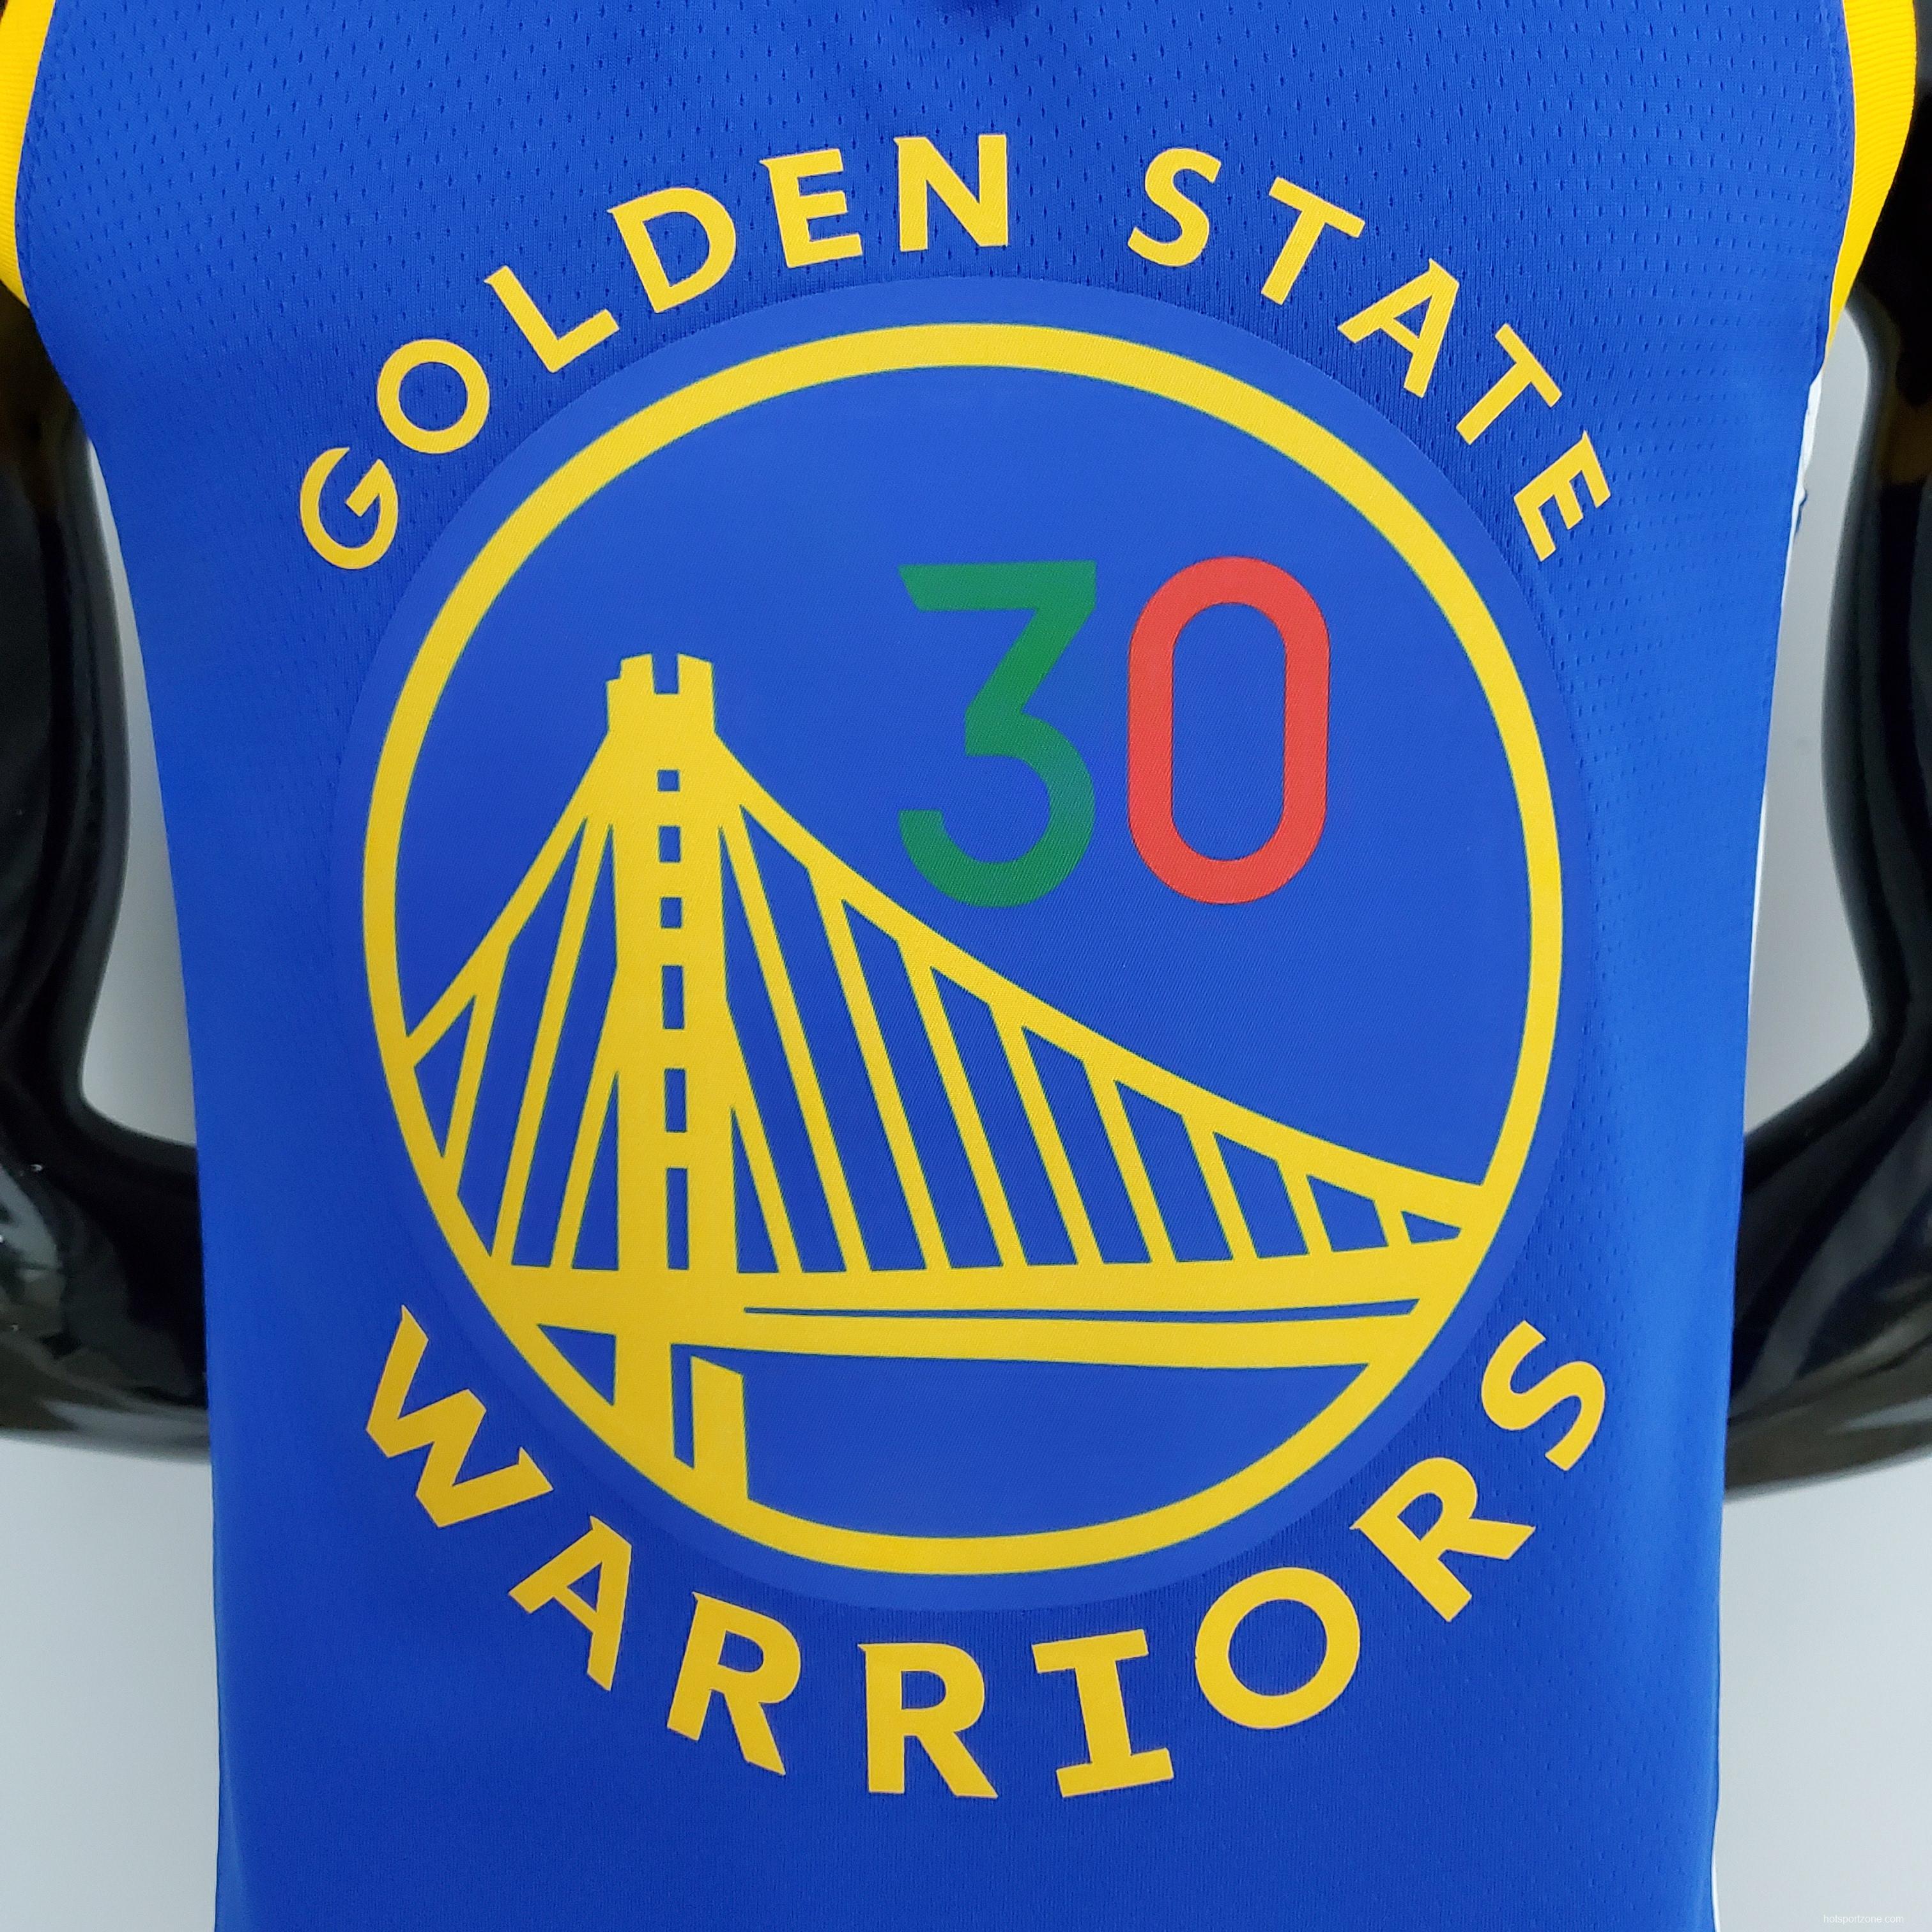 75th Anniversary Golden State Warriors Curry #30 Mexico Edition Blue NBA Jersey